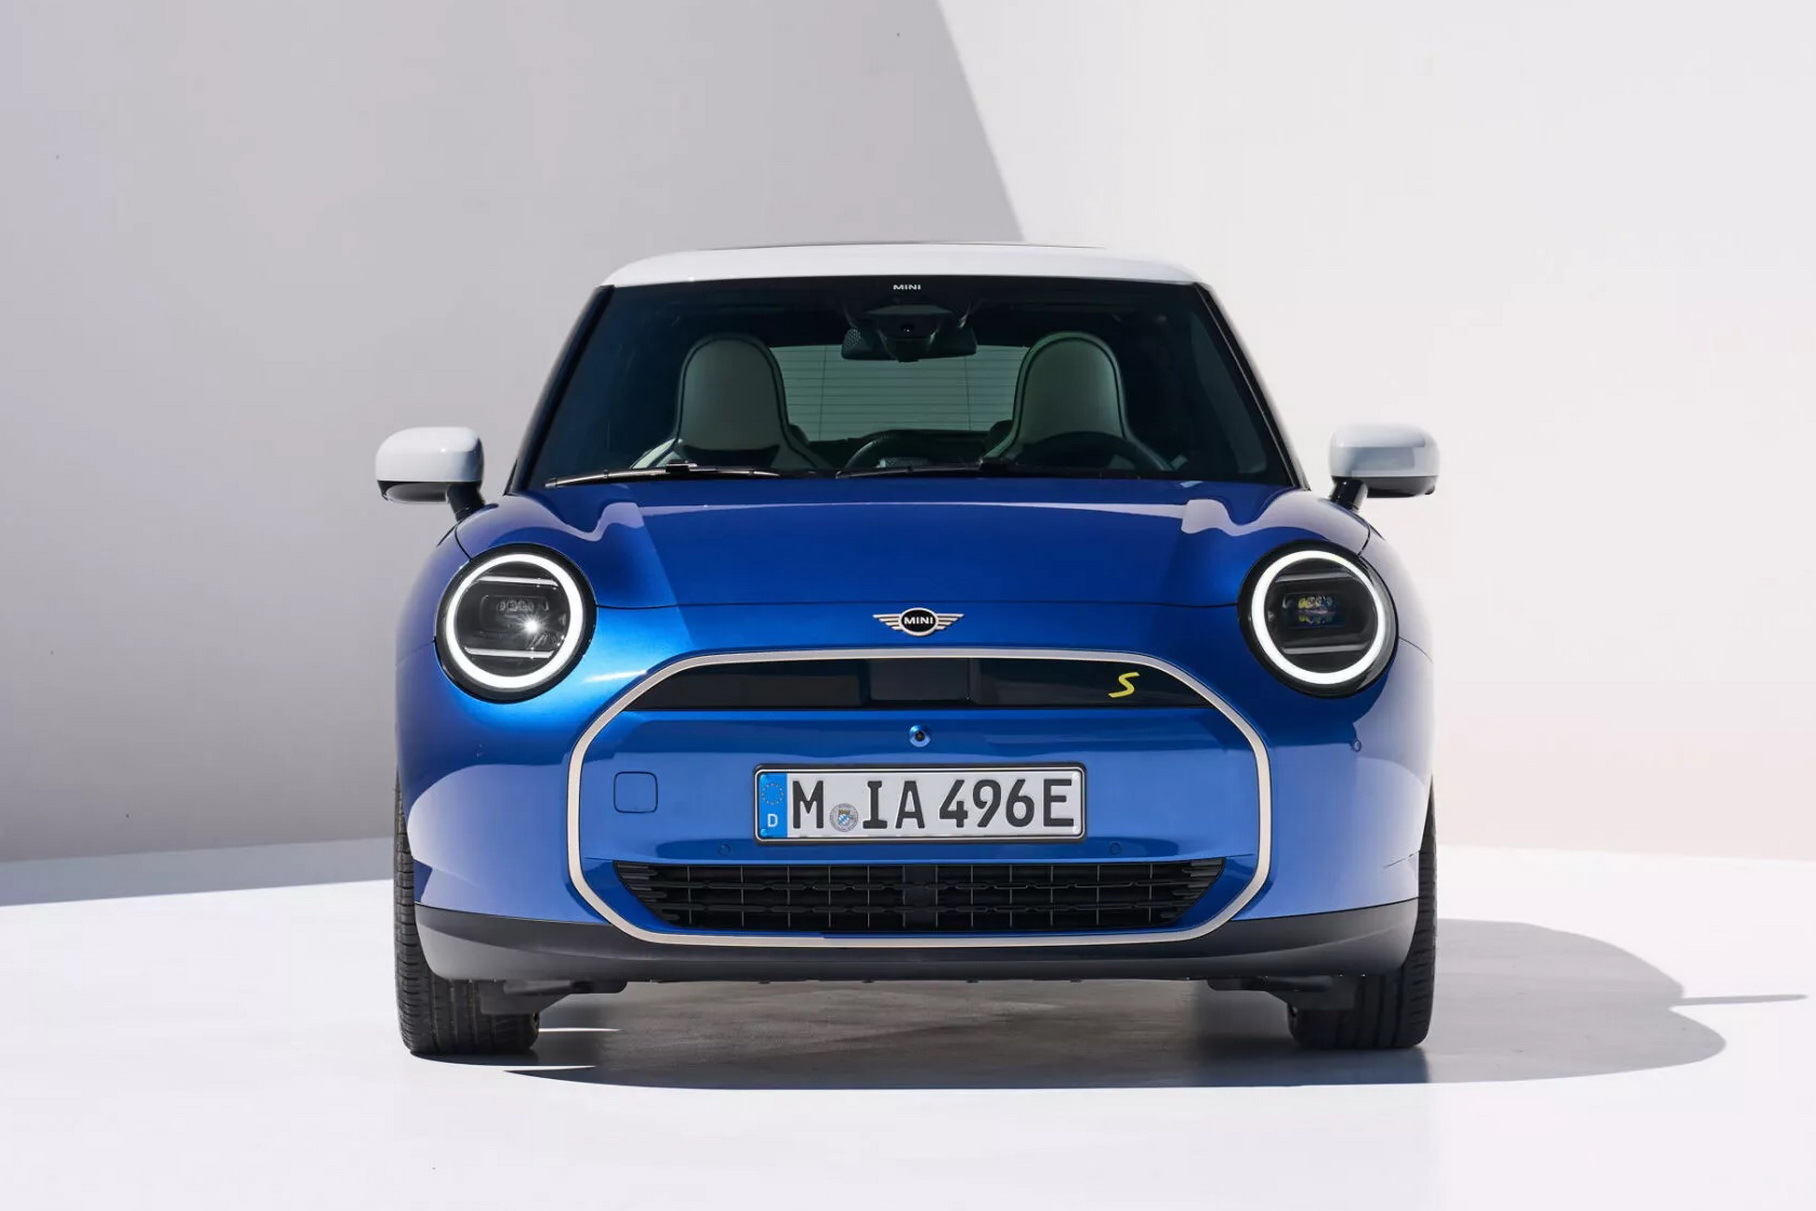 The new Chinese-assembled MINI will be offered in three body types